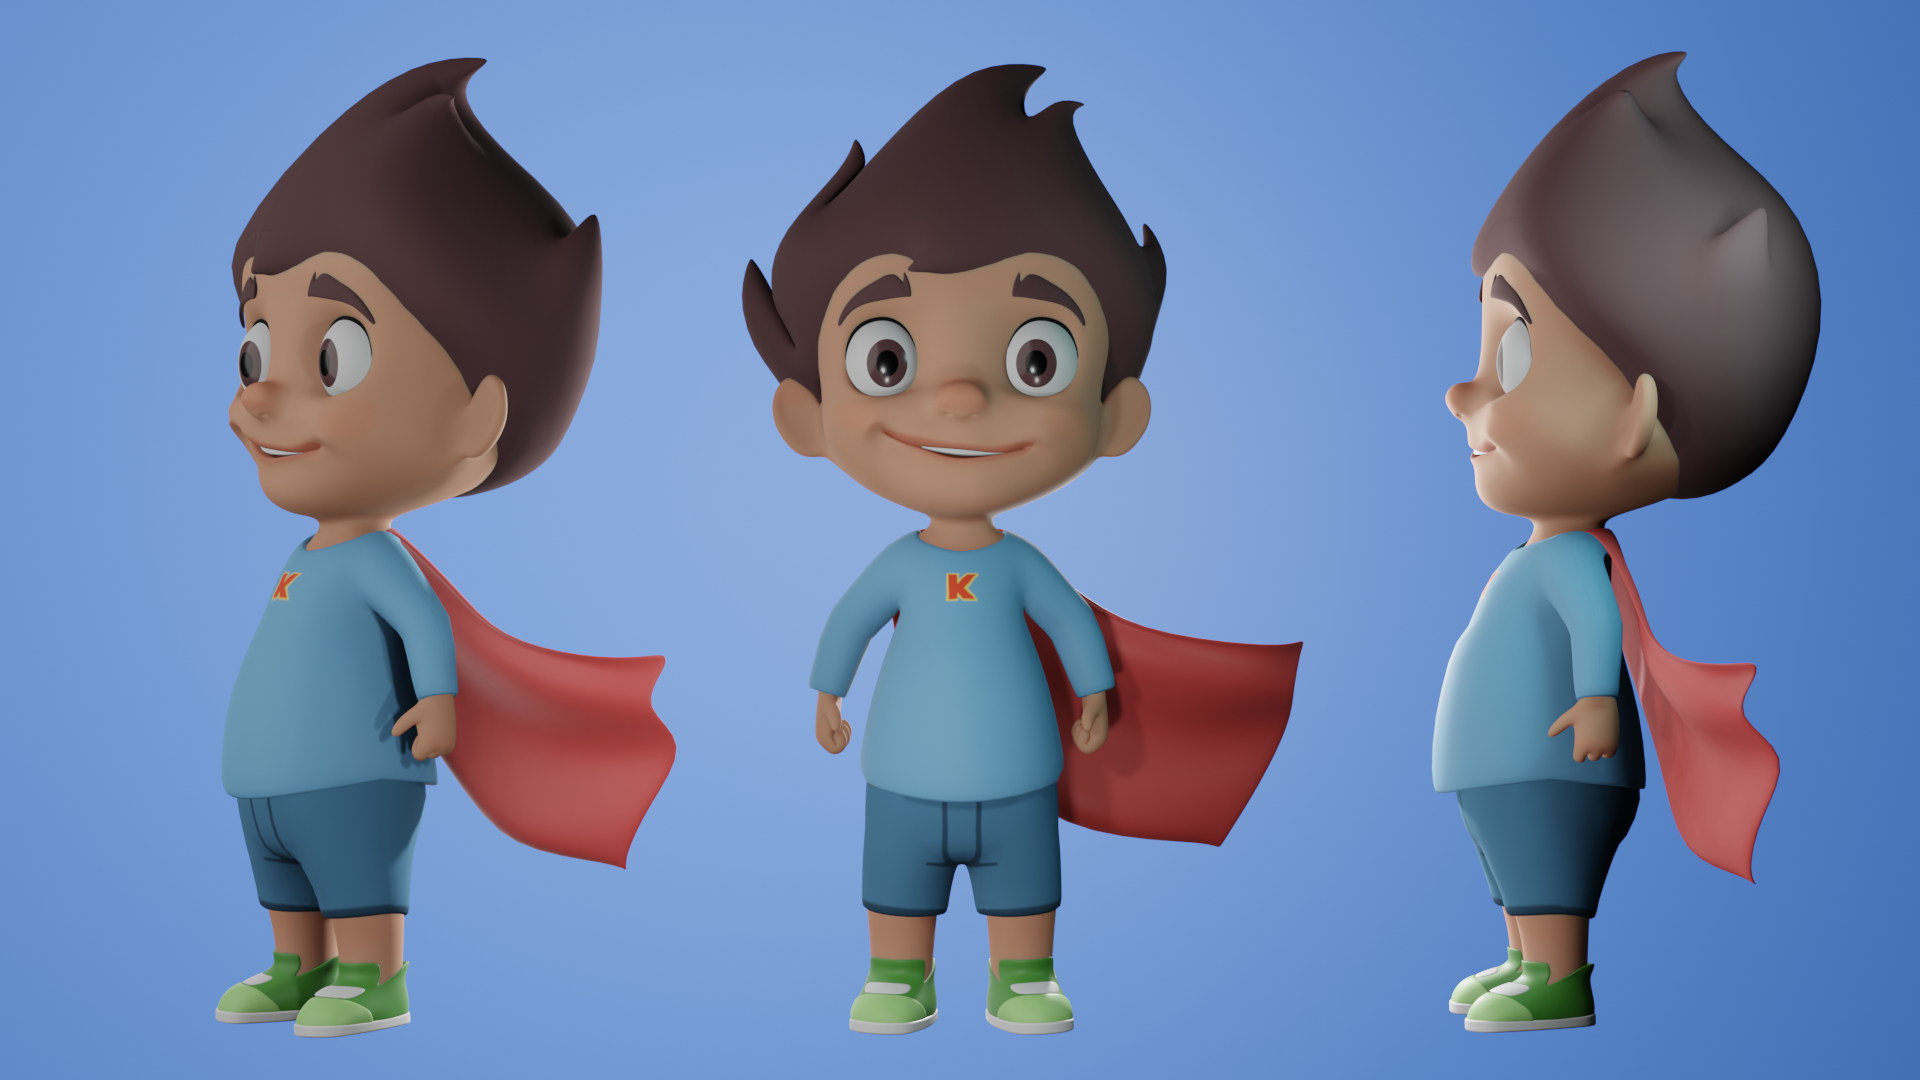 Miguel 3D Character Done in Blender  - Finished Projects - Blender  Artists Community